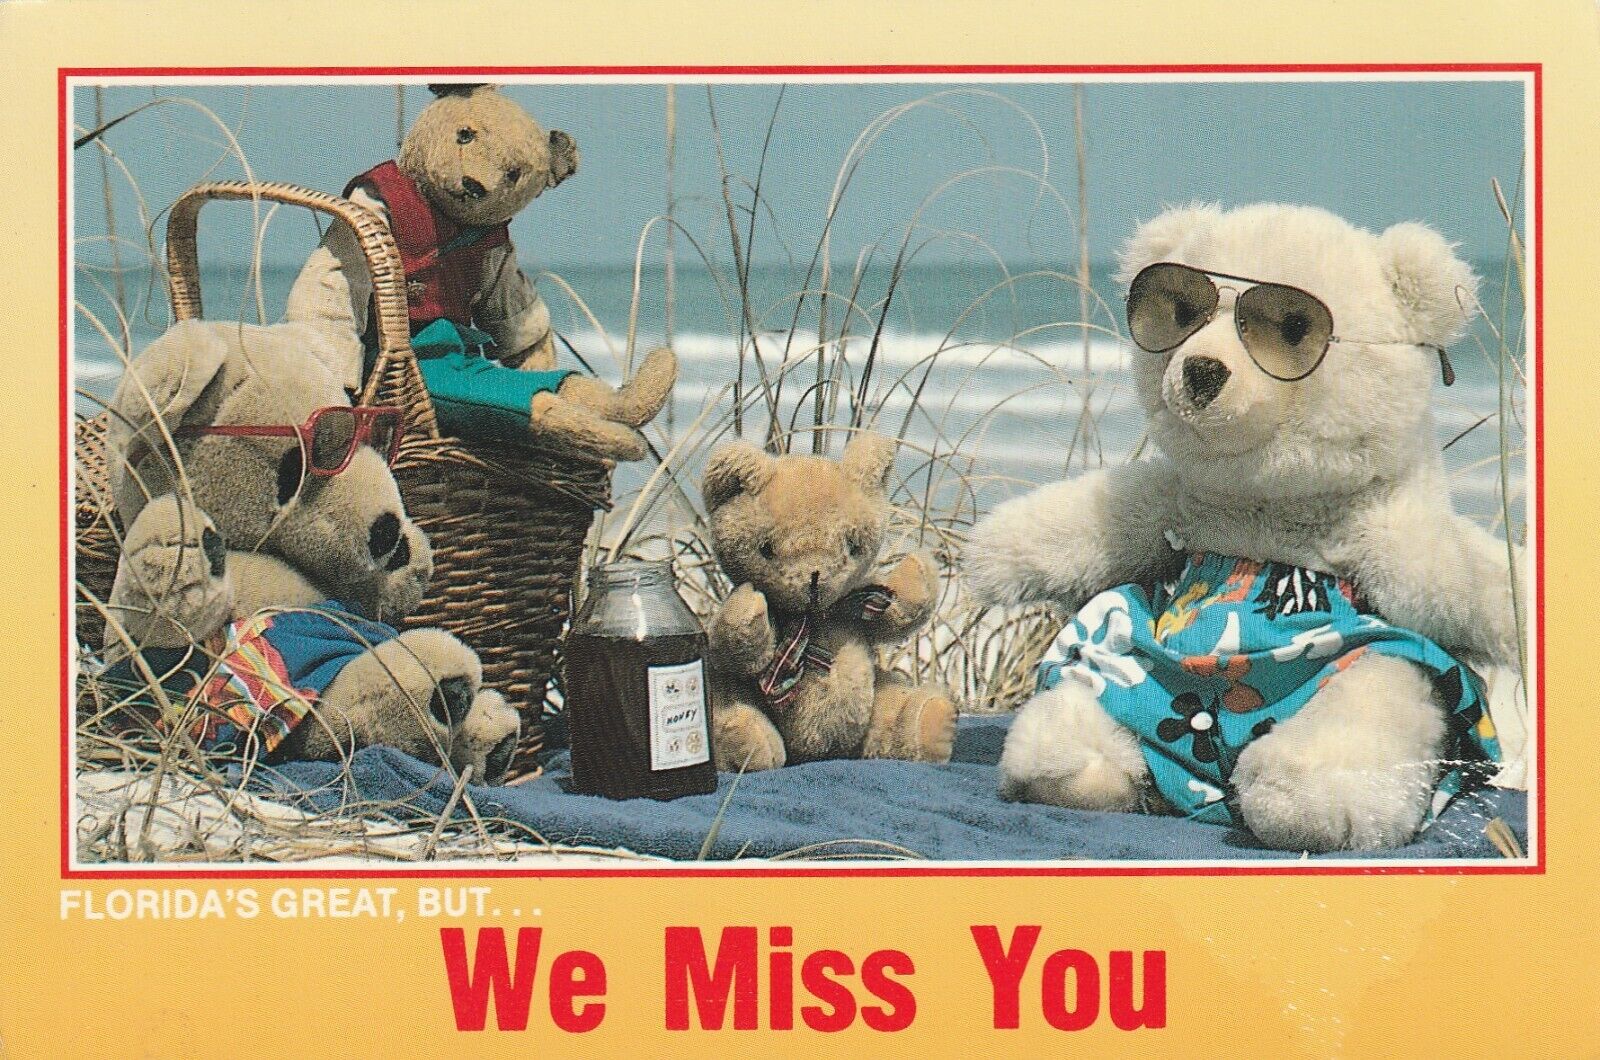 Vintage Postcard Florida We Miss You Teddy Bears Beach Posted Vacation